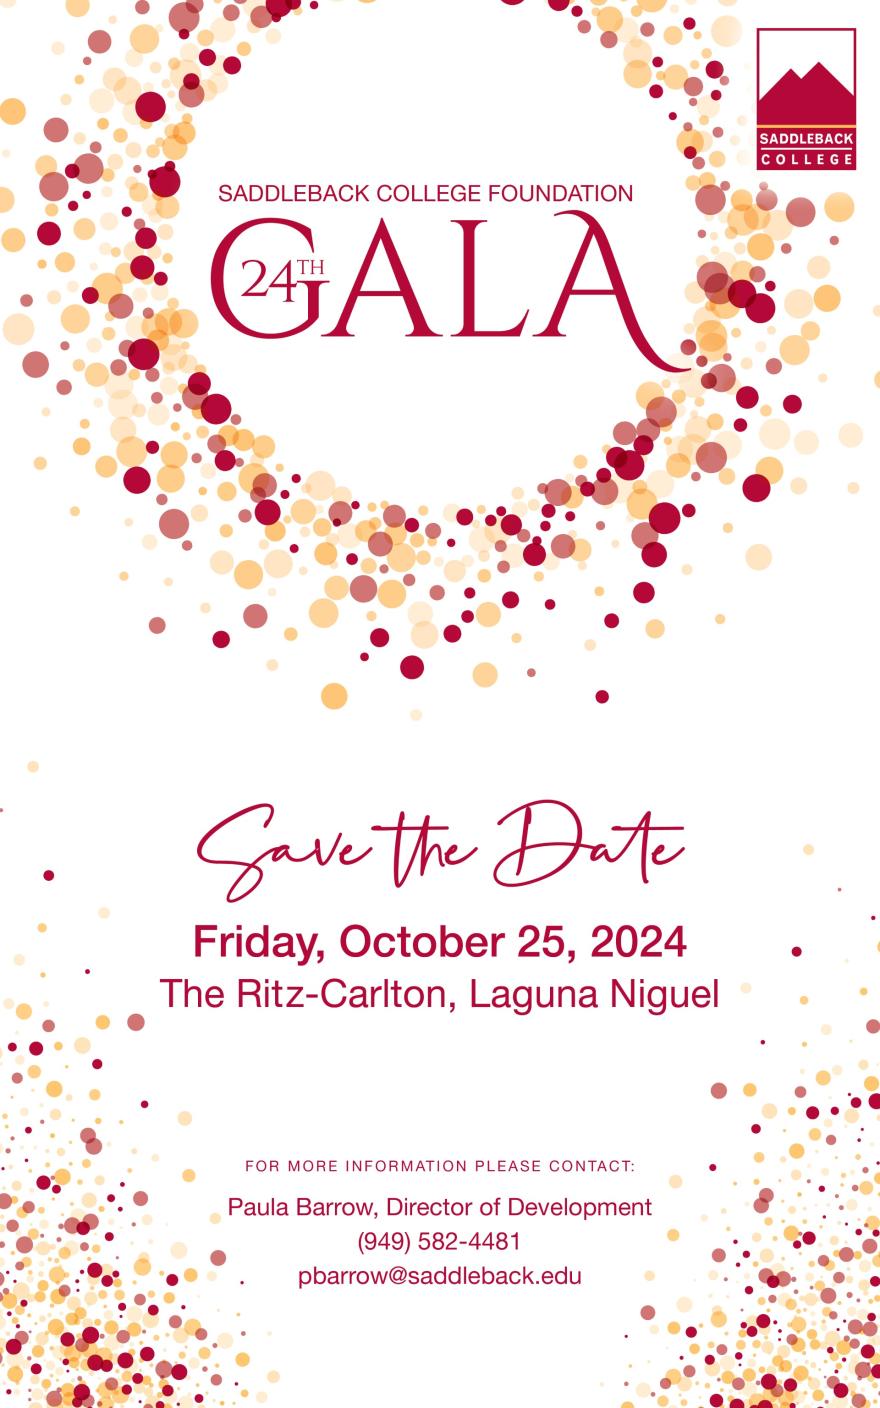 Saddleback College Foundation 2024 Gala - Save the Date: Friday, October 25, 2024 at The Ritz-Carlton, Laguna Niguel.  For more information contact Paula Barrow, Director of Development, (949) 582-4481.